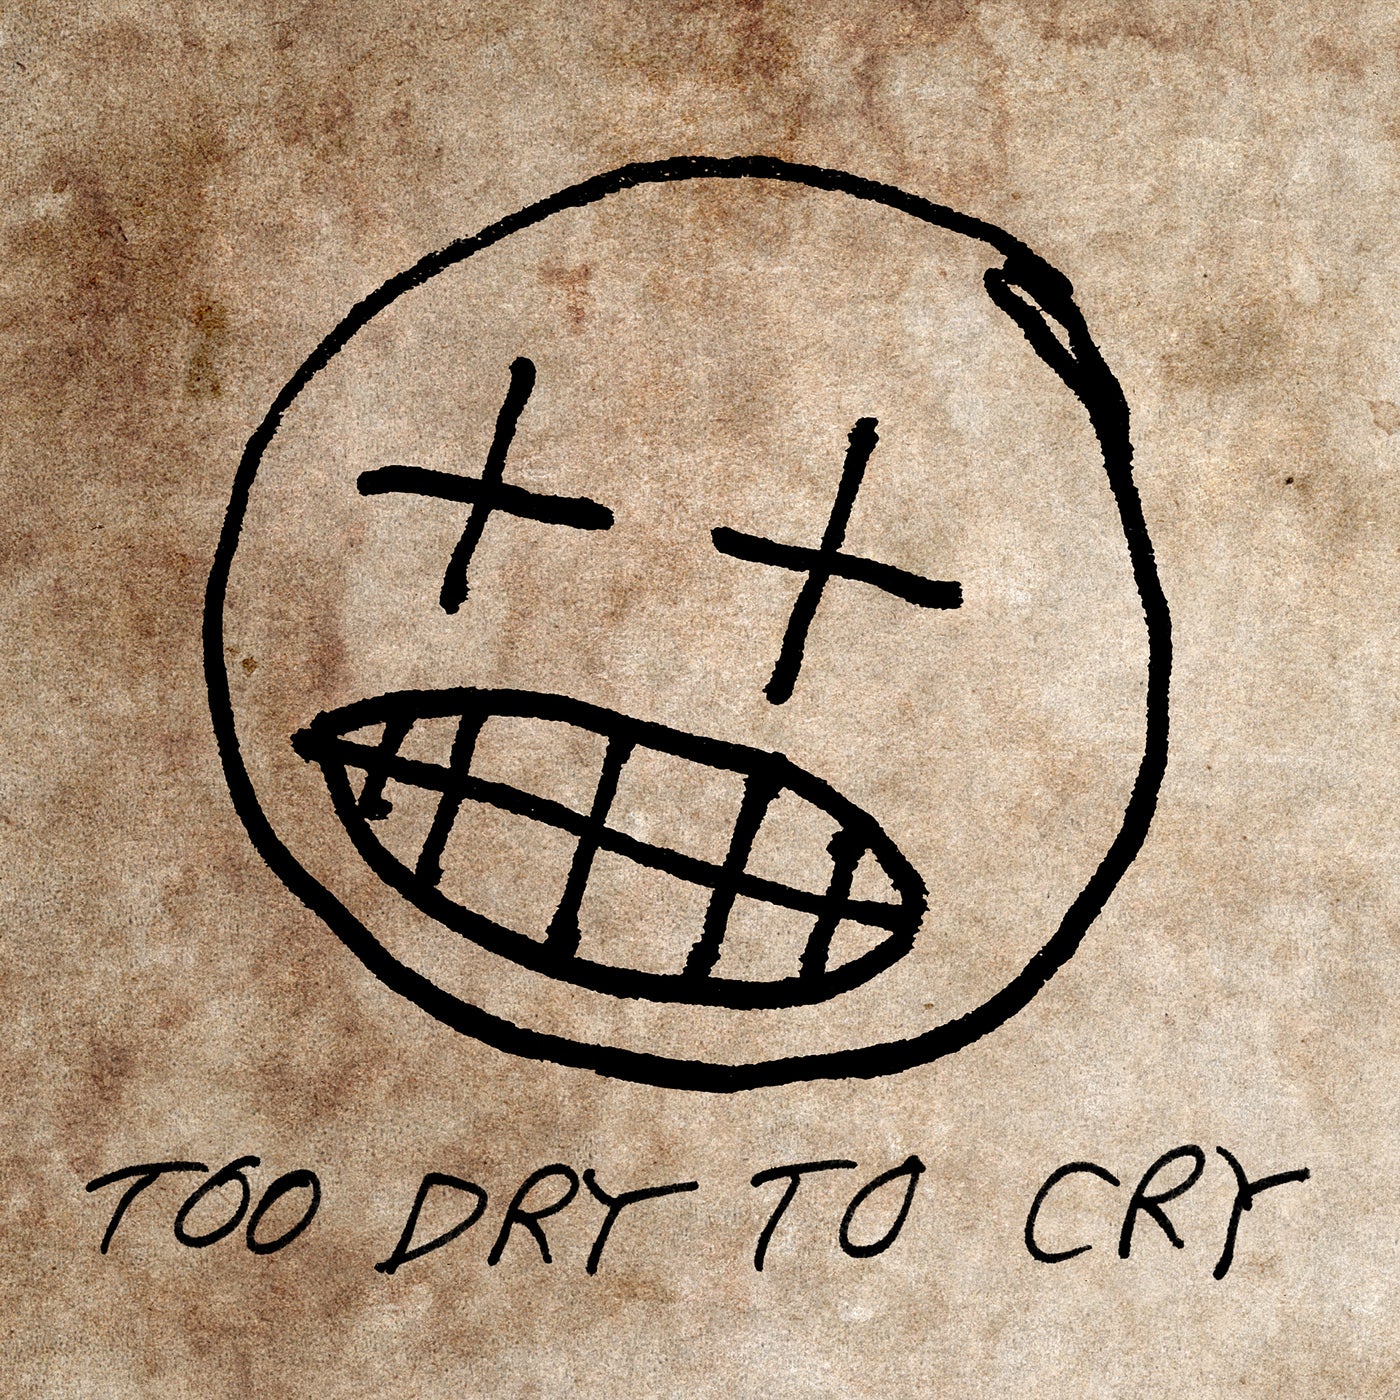 Too Dry To Cry